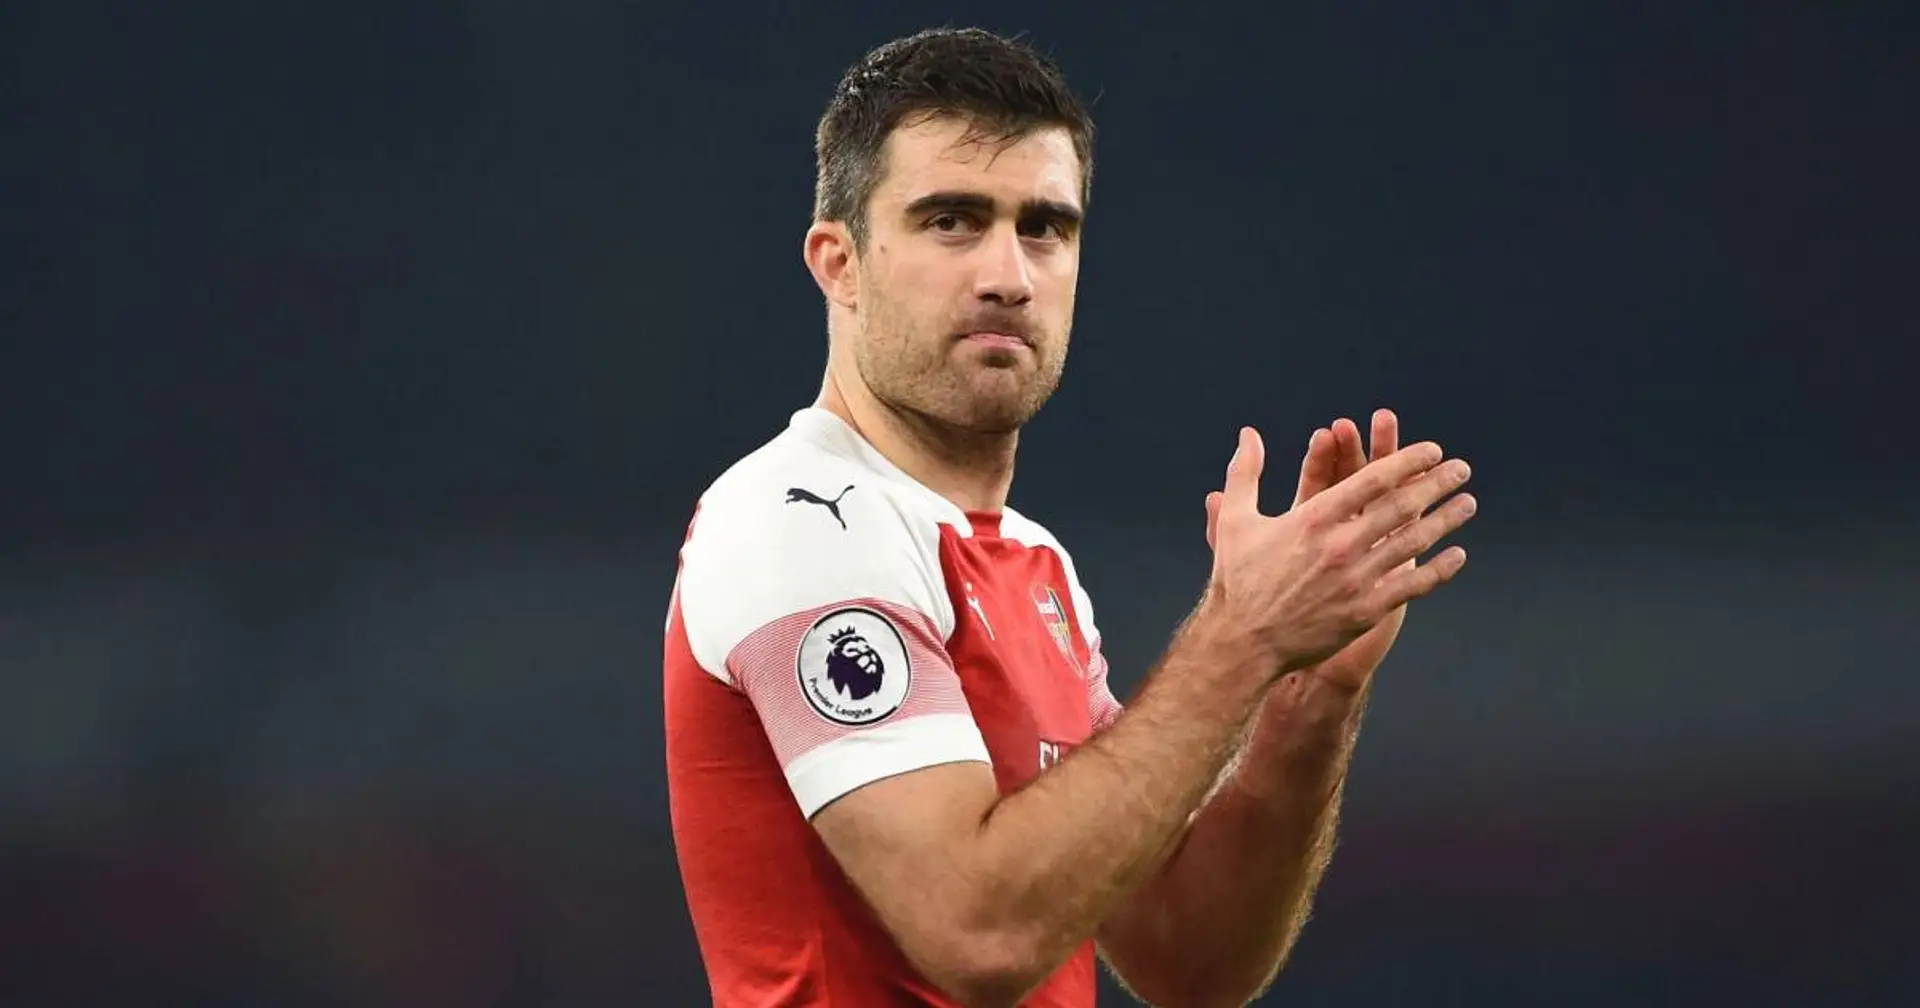 'He's a professional and a great person to work with': Arteta has only warm words to say about outgoing Sokratis